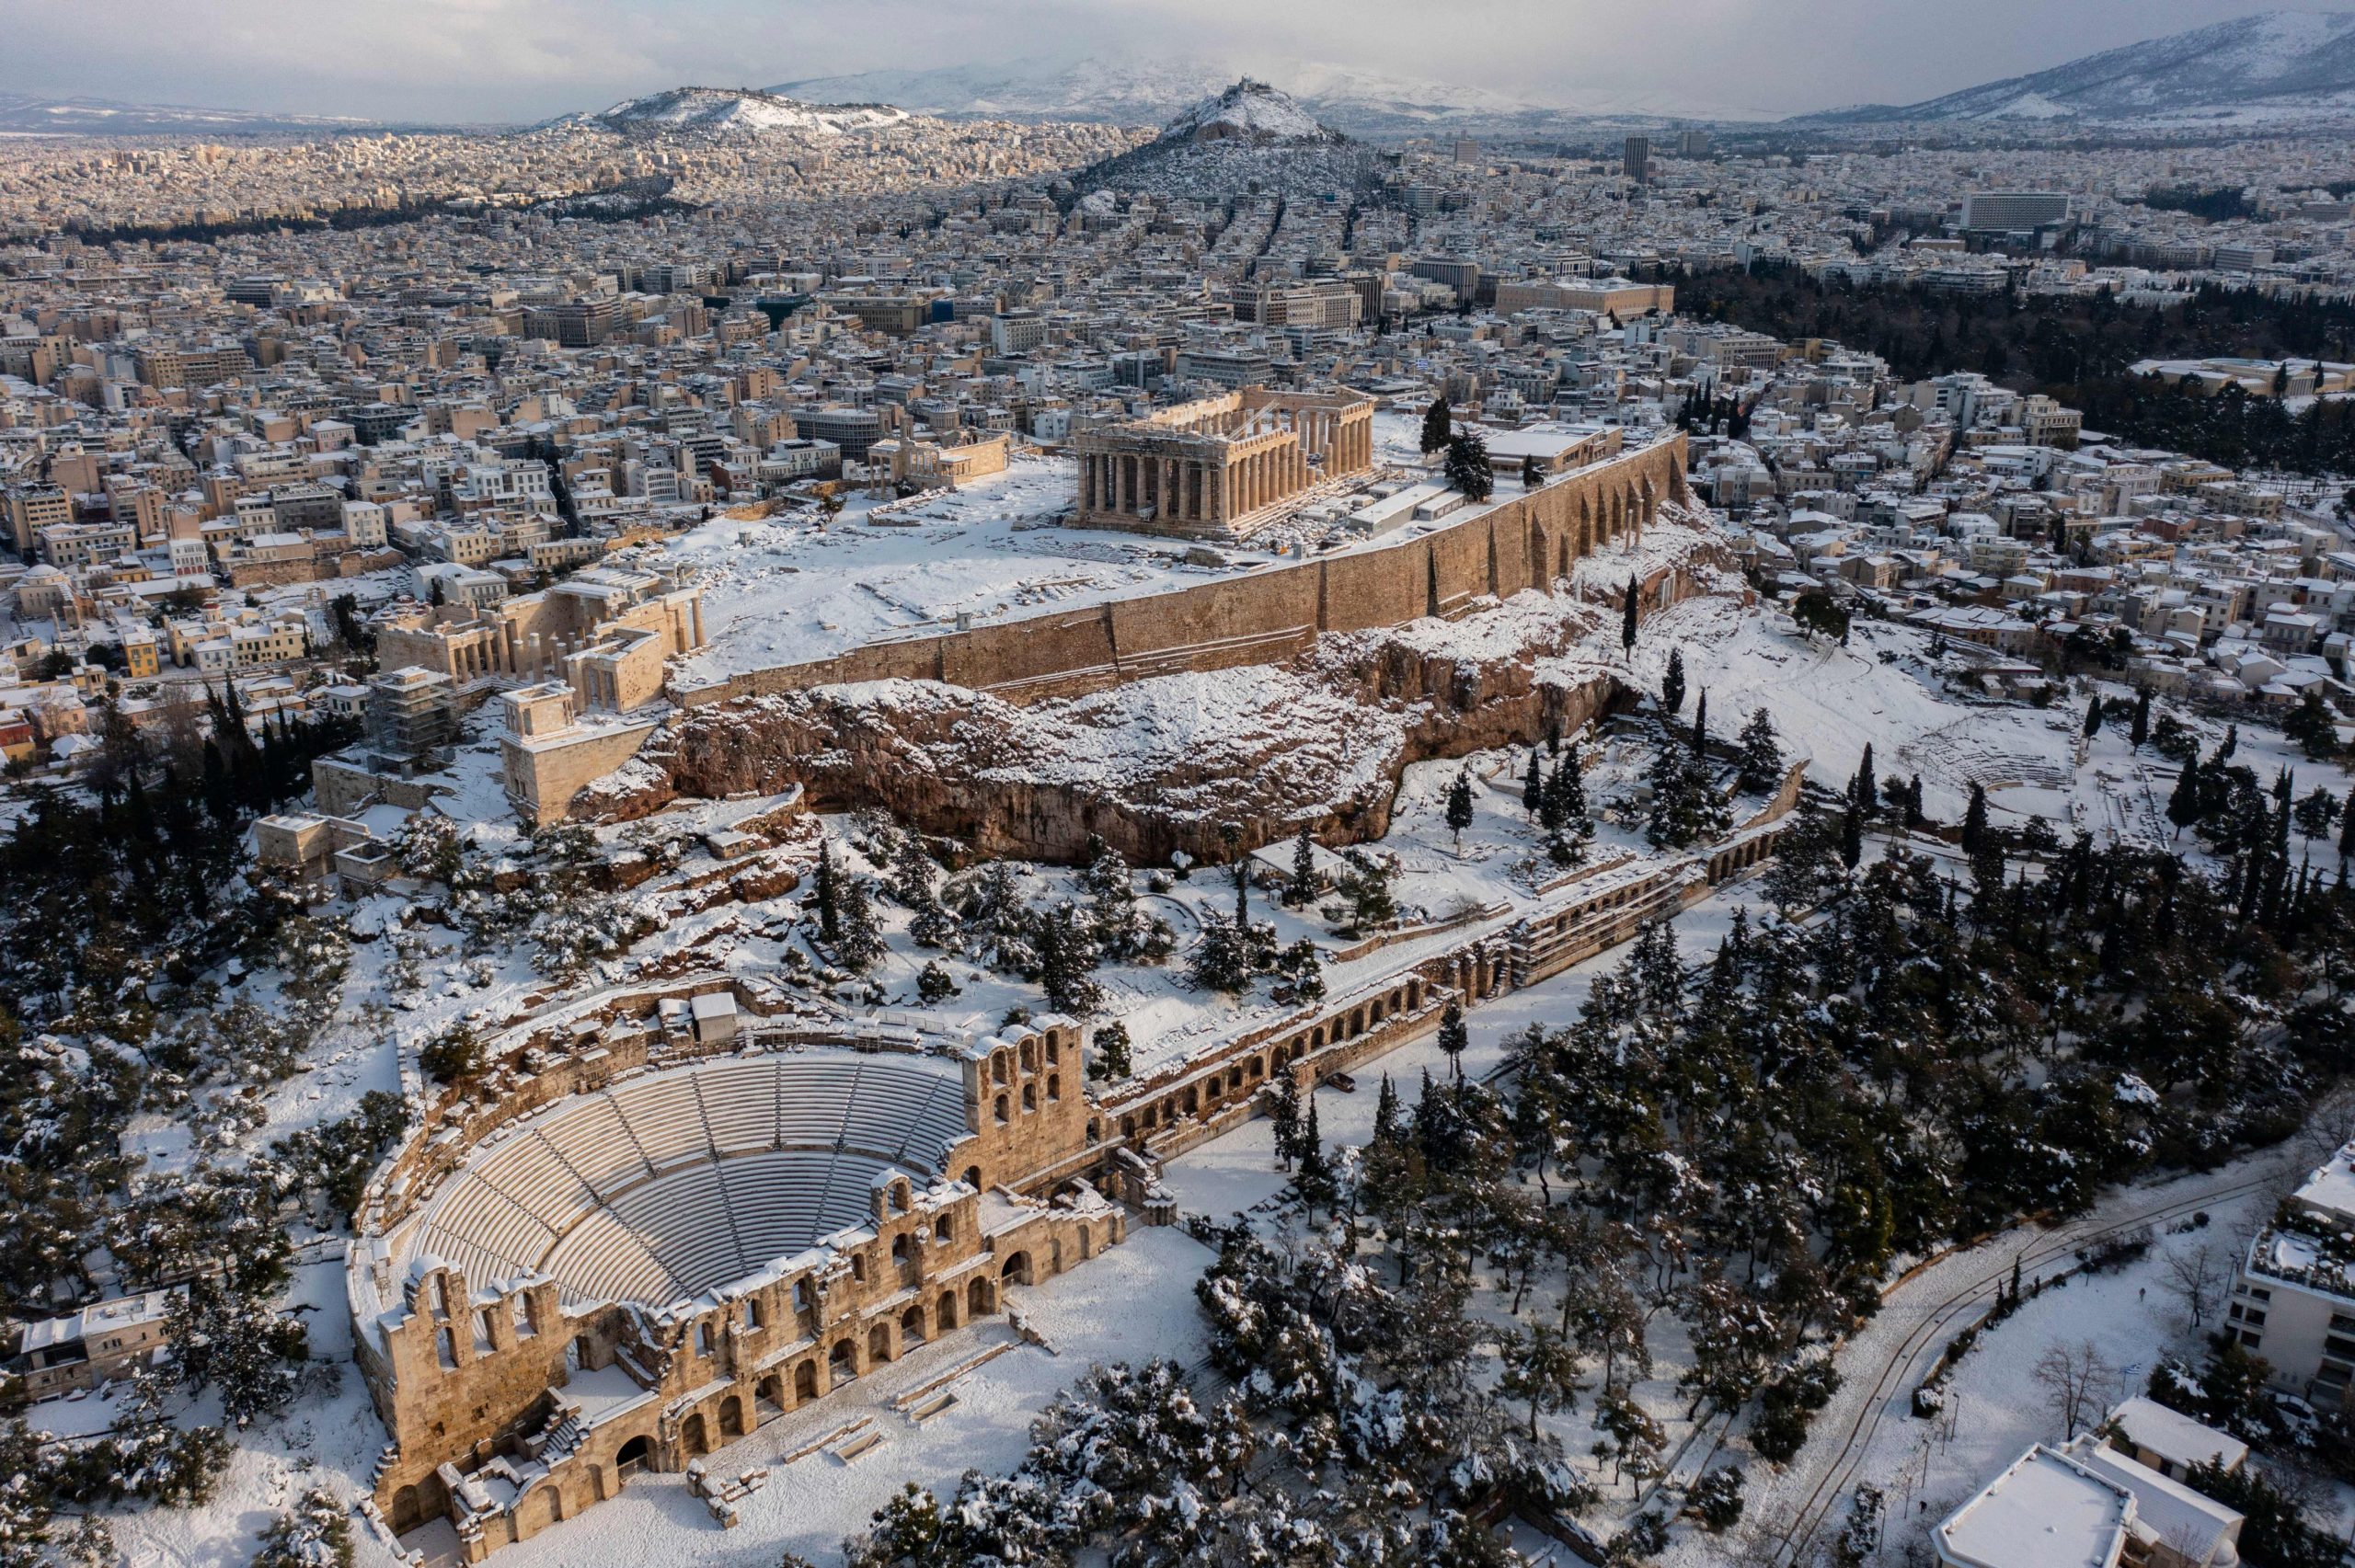 The snow-covered Ancient Temple of Parthenon atop the Acropolis. (Photo: Aris Messinis/AFP, Getty Images)